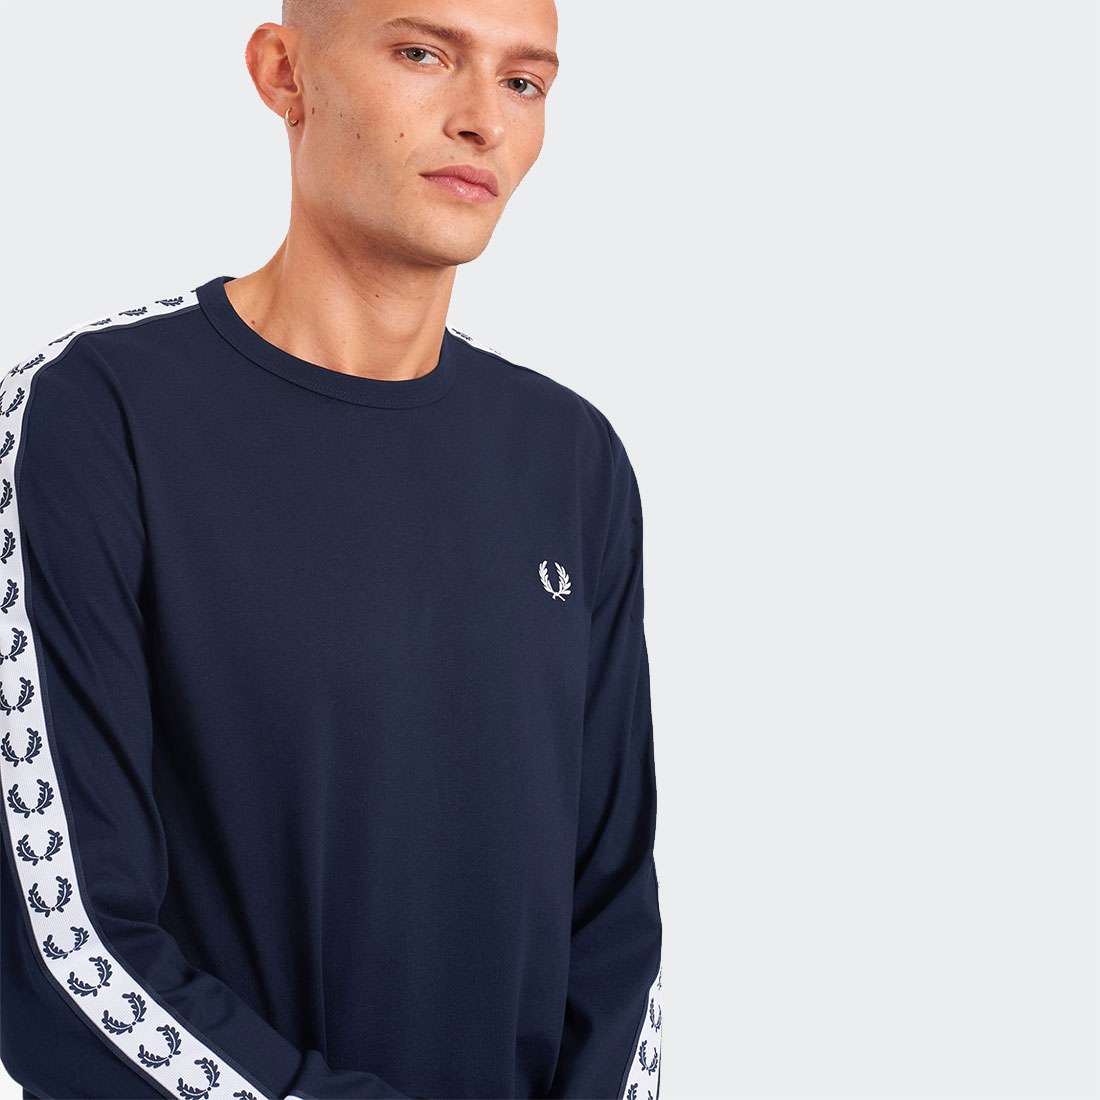 SWEATSHIRT FRED PERRY M9673-266 CARBON BLUE